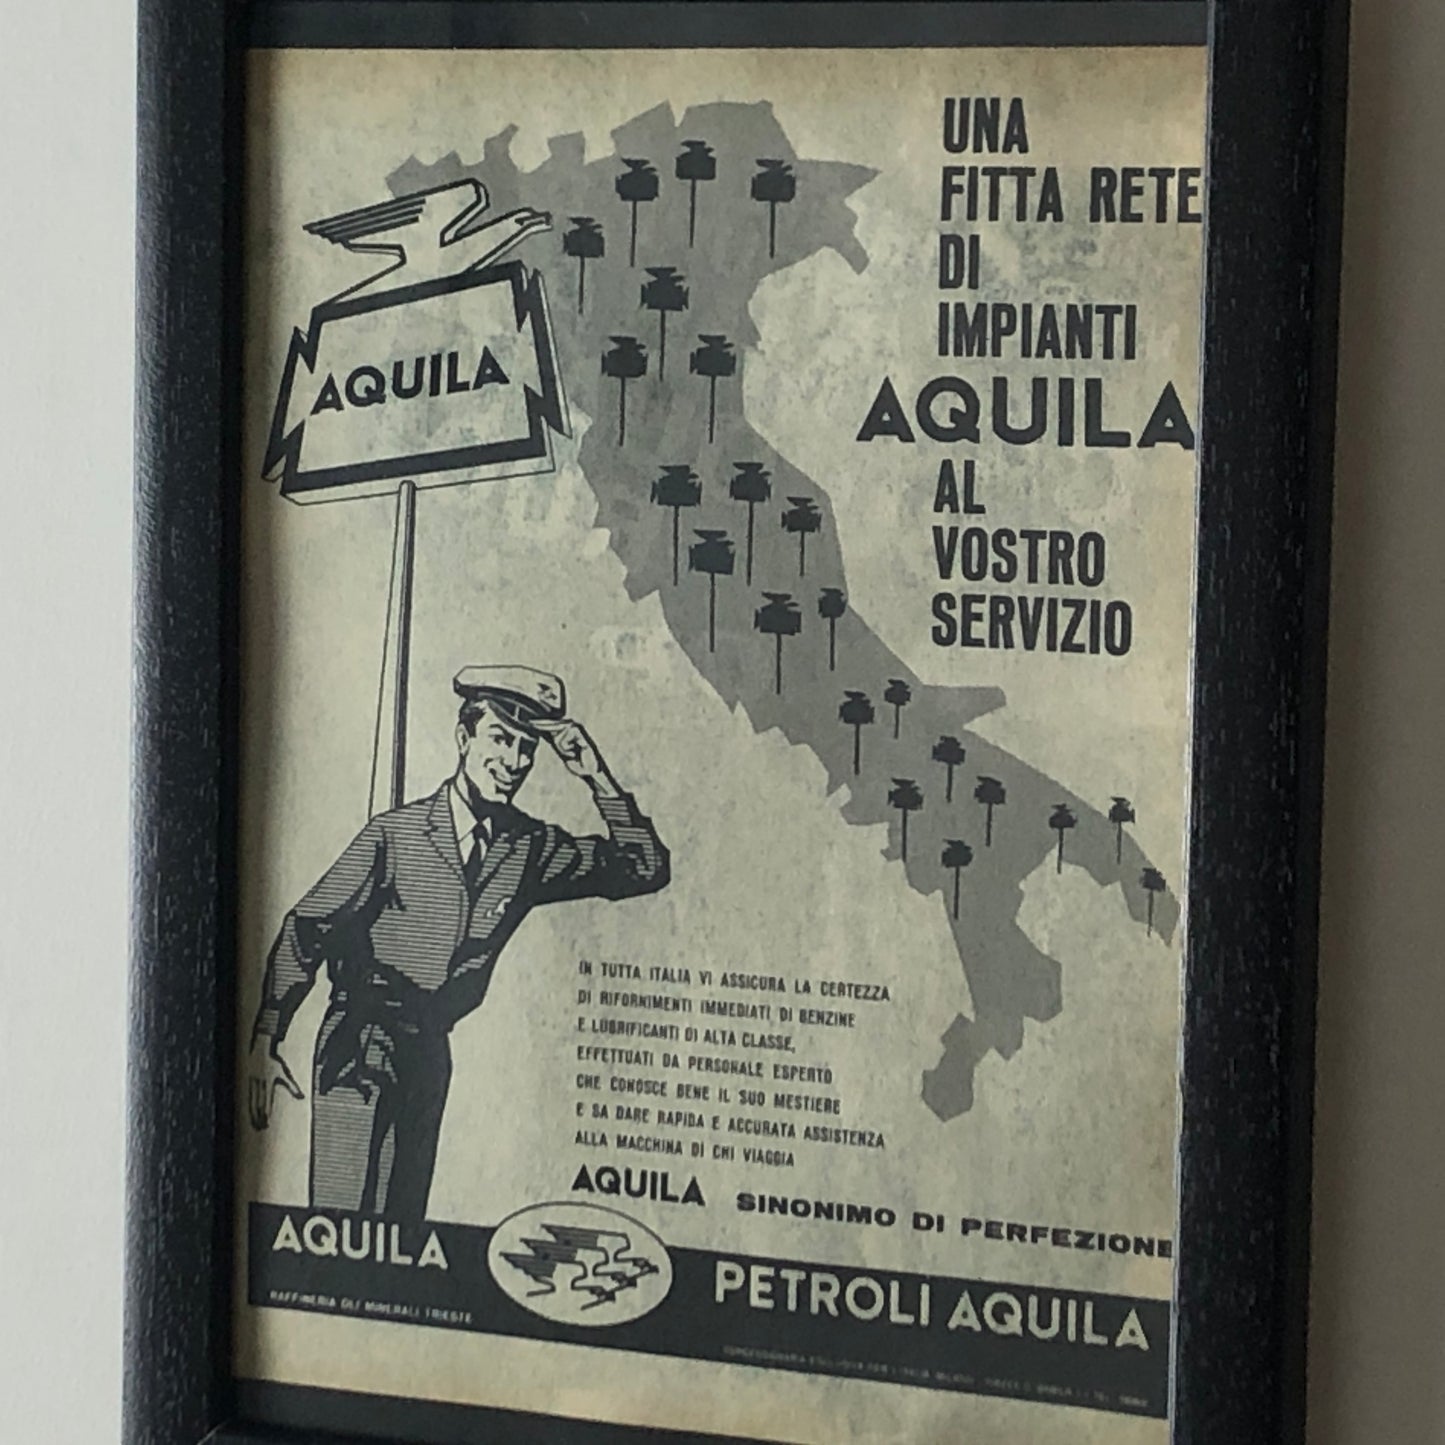 Aquila Mineral Oil Refinery Trieste, 1960 Advertising Petroli Aquila Plant Network in Italy